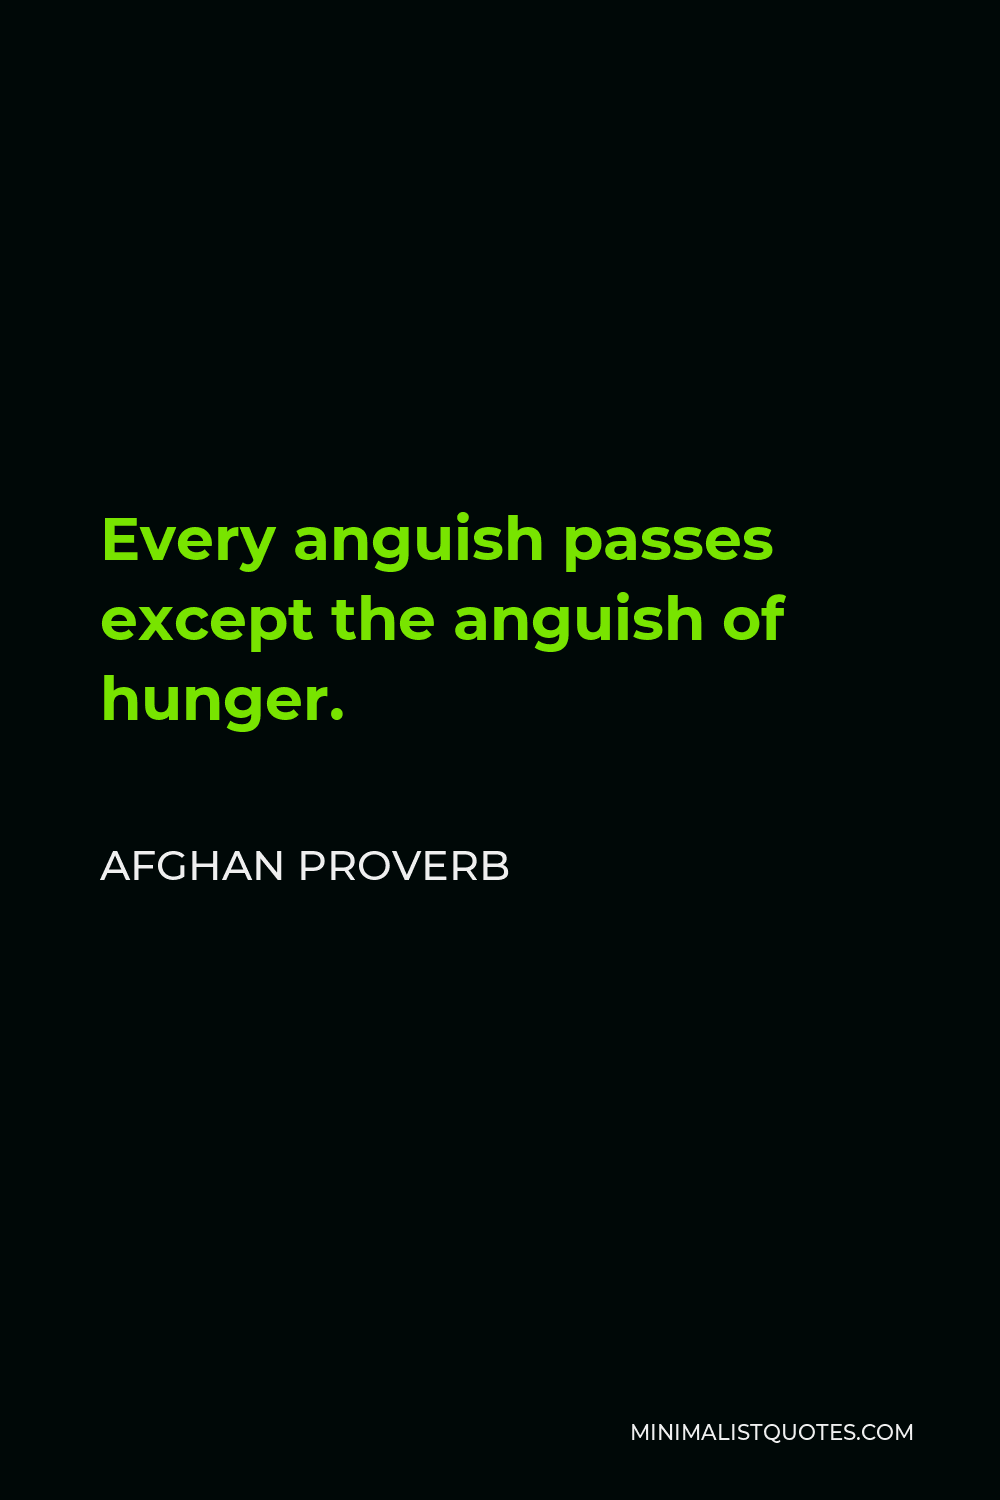 Afghan Proverb Quote - Every anguish passes except the anguish of hunger.